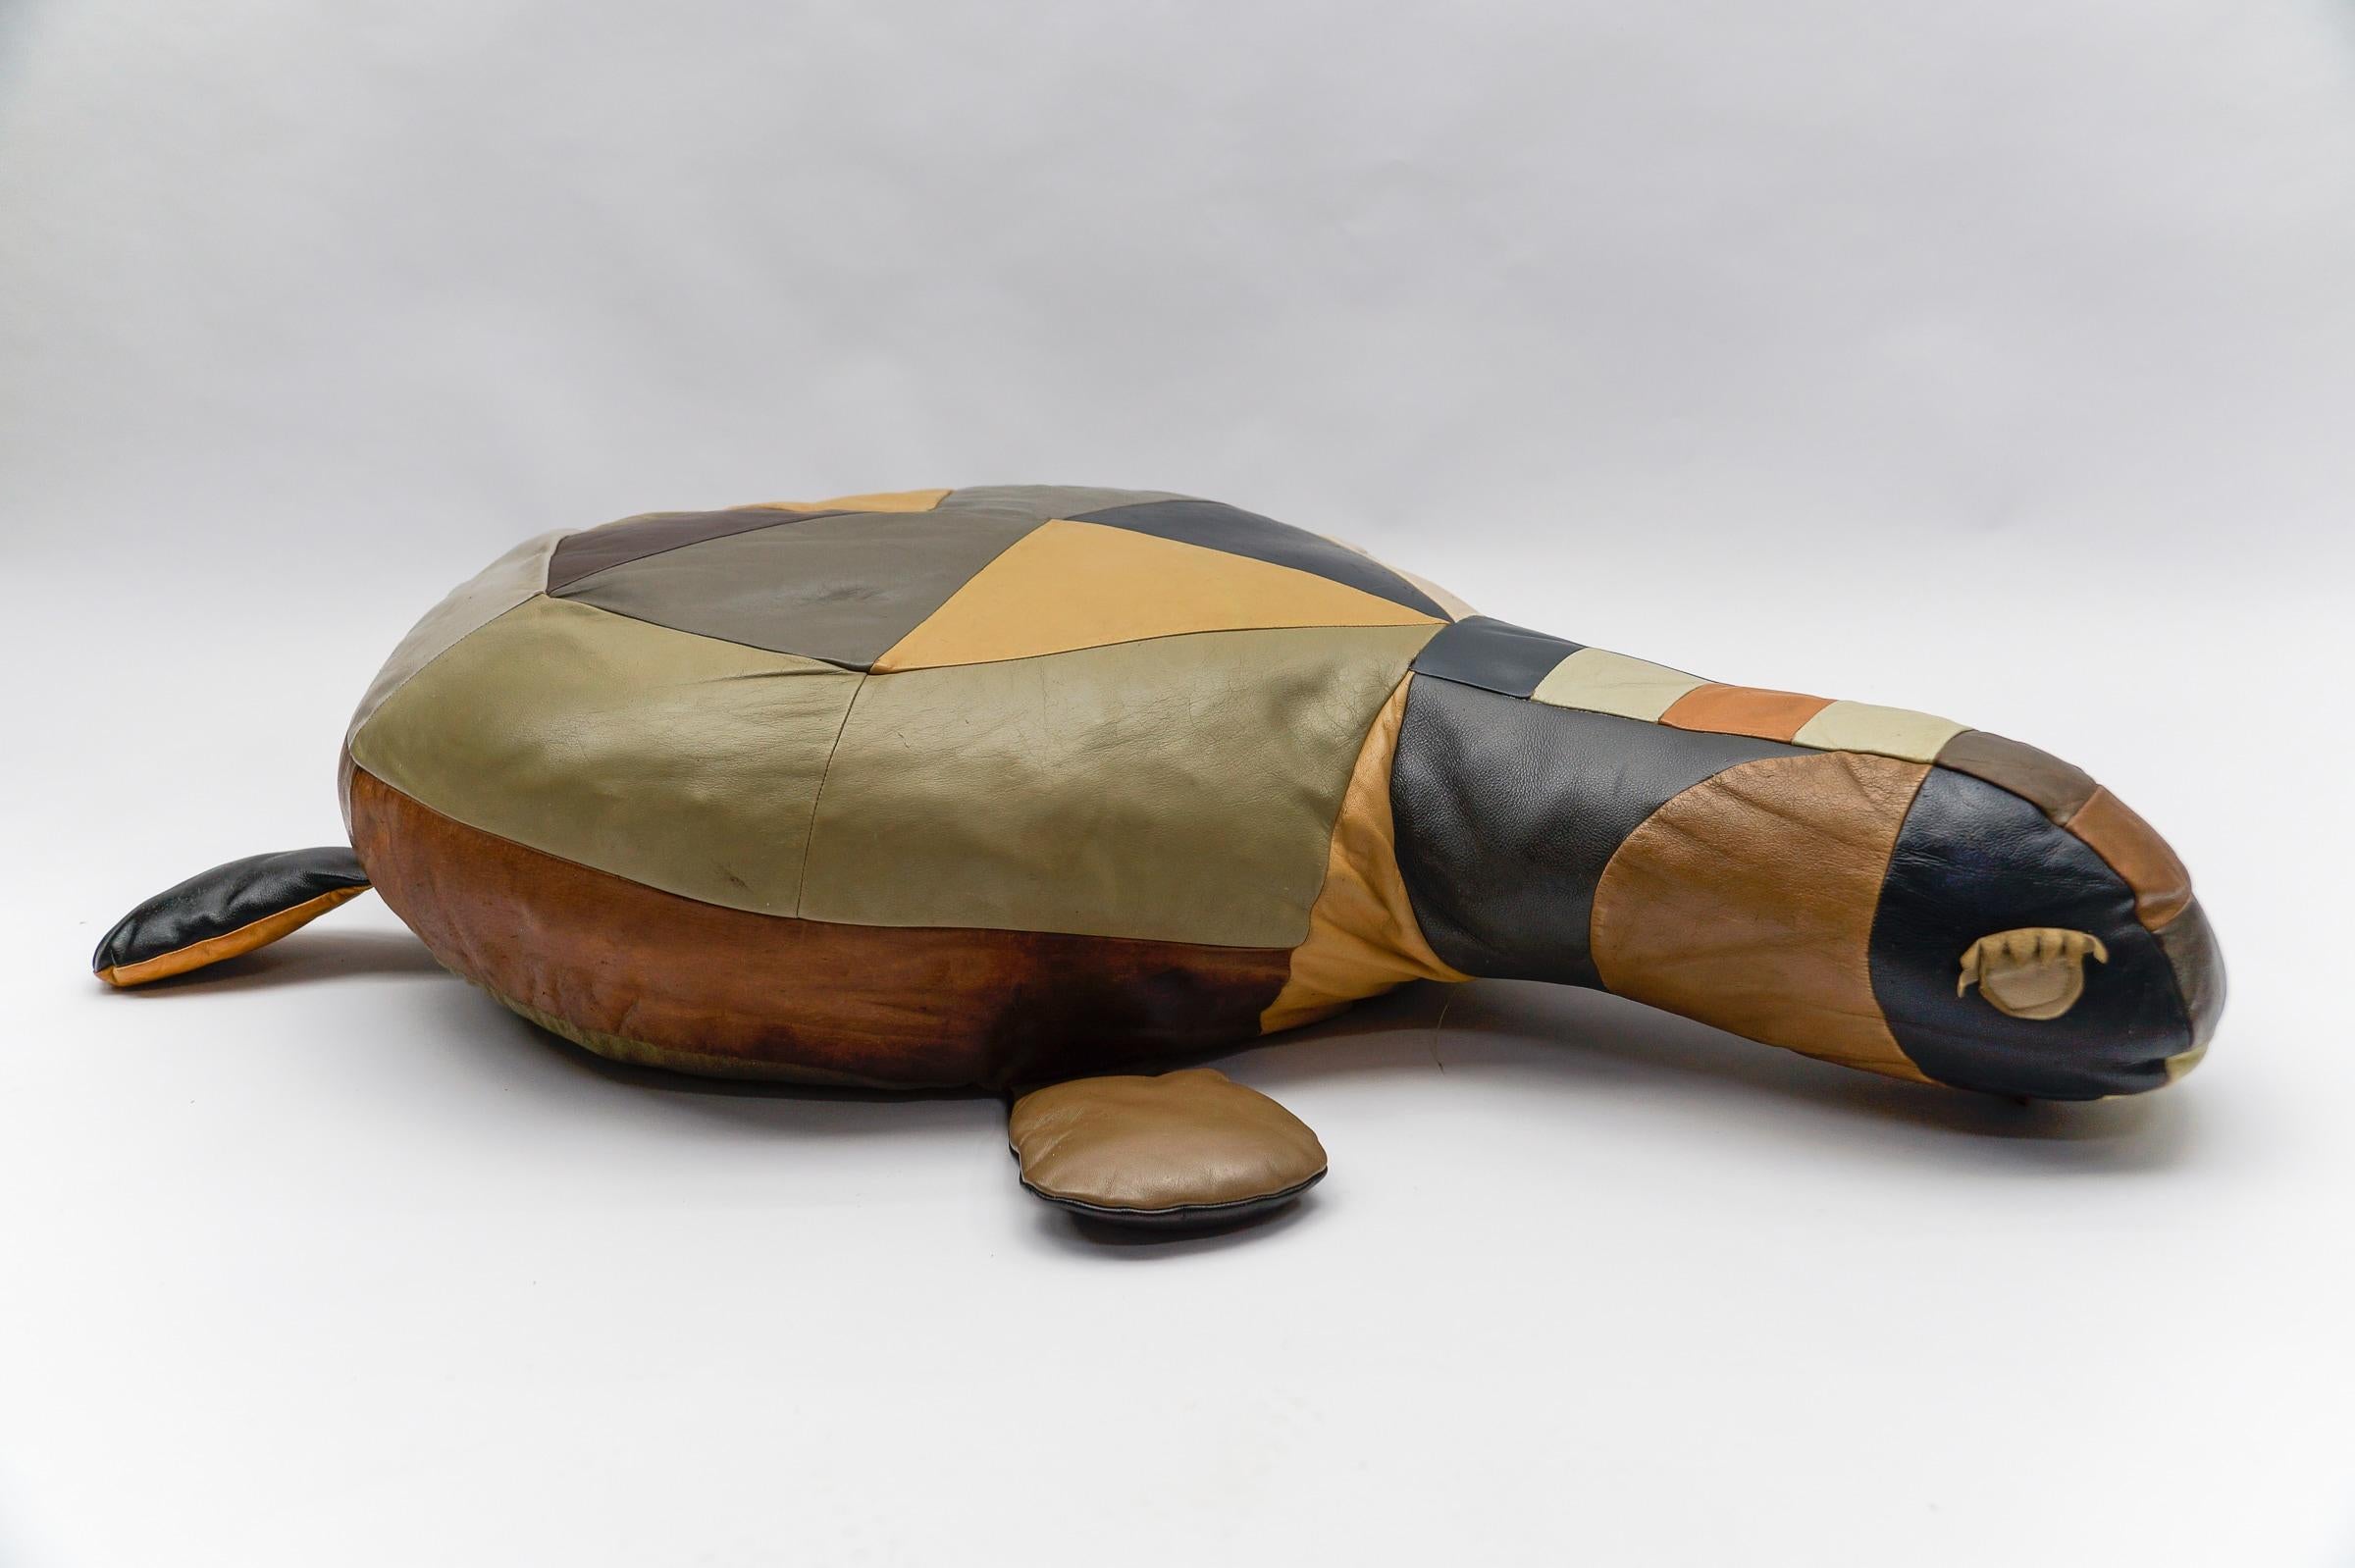 Mid-20th Century Set of 3 Leather Patchwork Turtle Poufs - Mid-Century Modern, Switzerland, 1960s For Sale